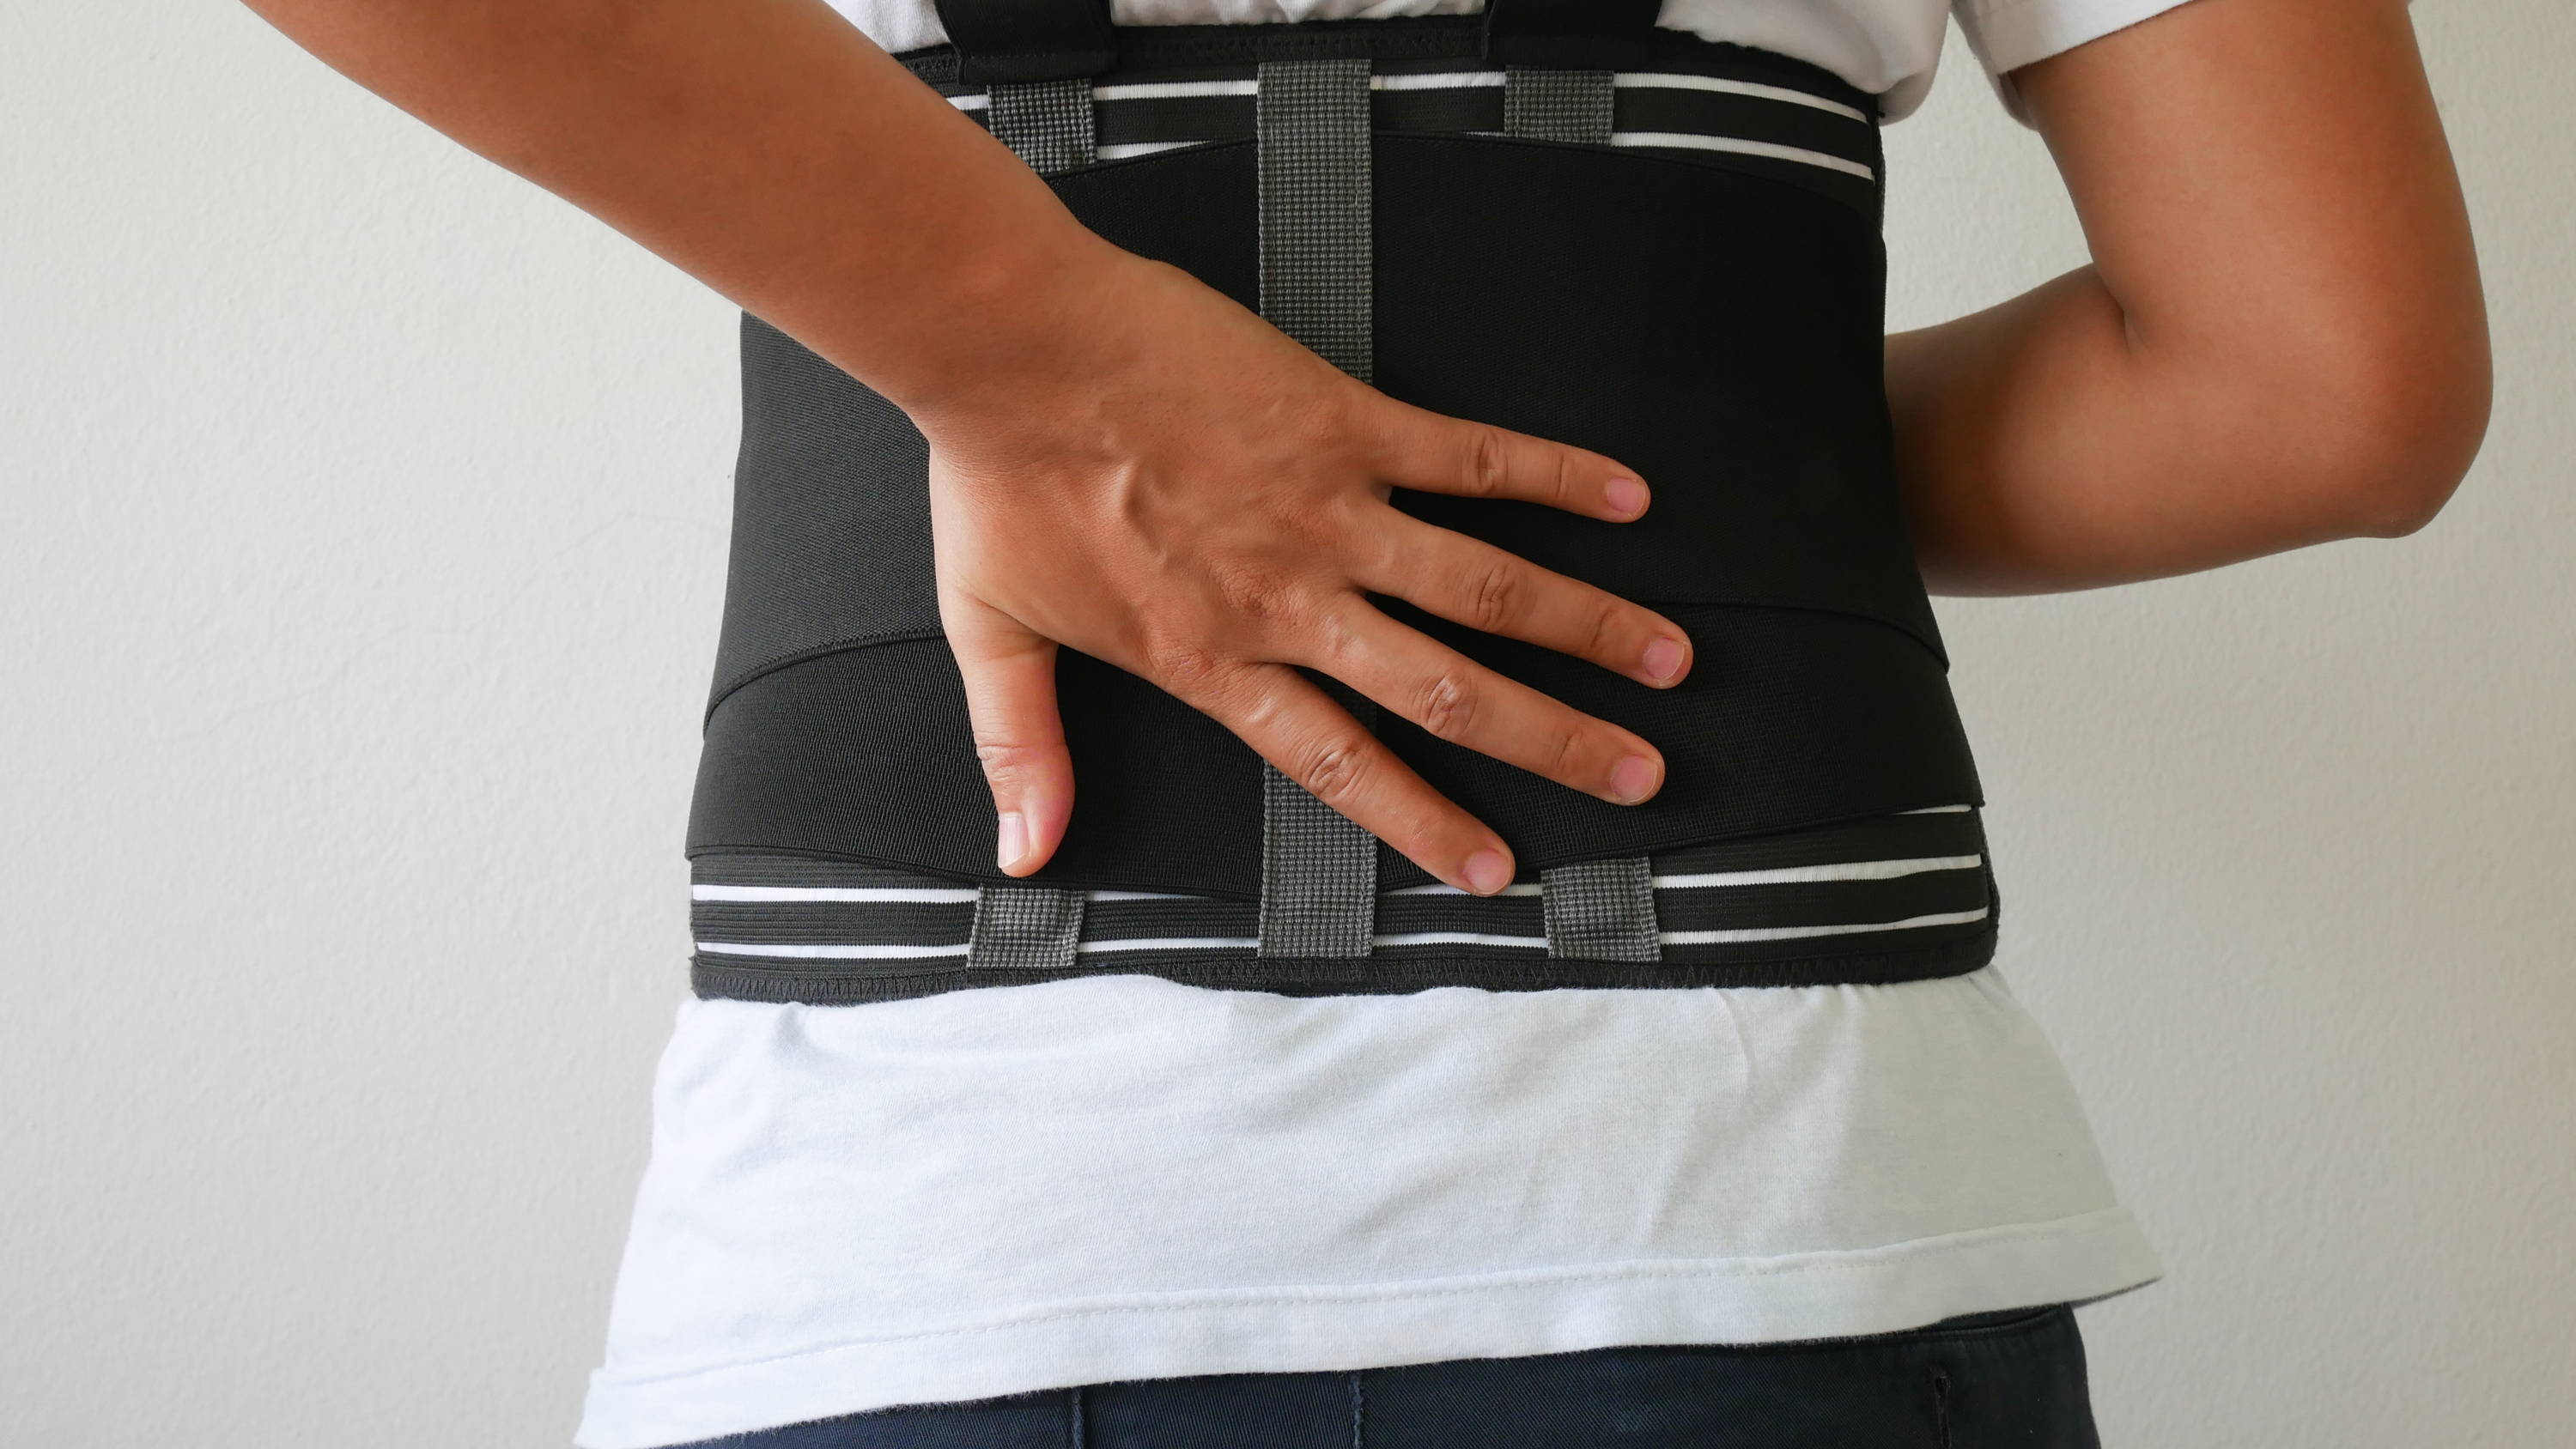 Man wearing a back brace, but uncomfortable  from the snug fit